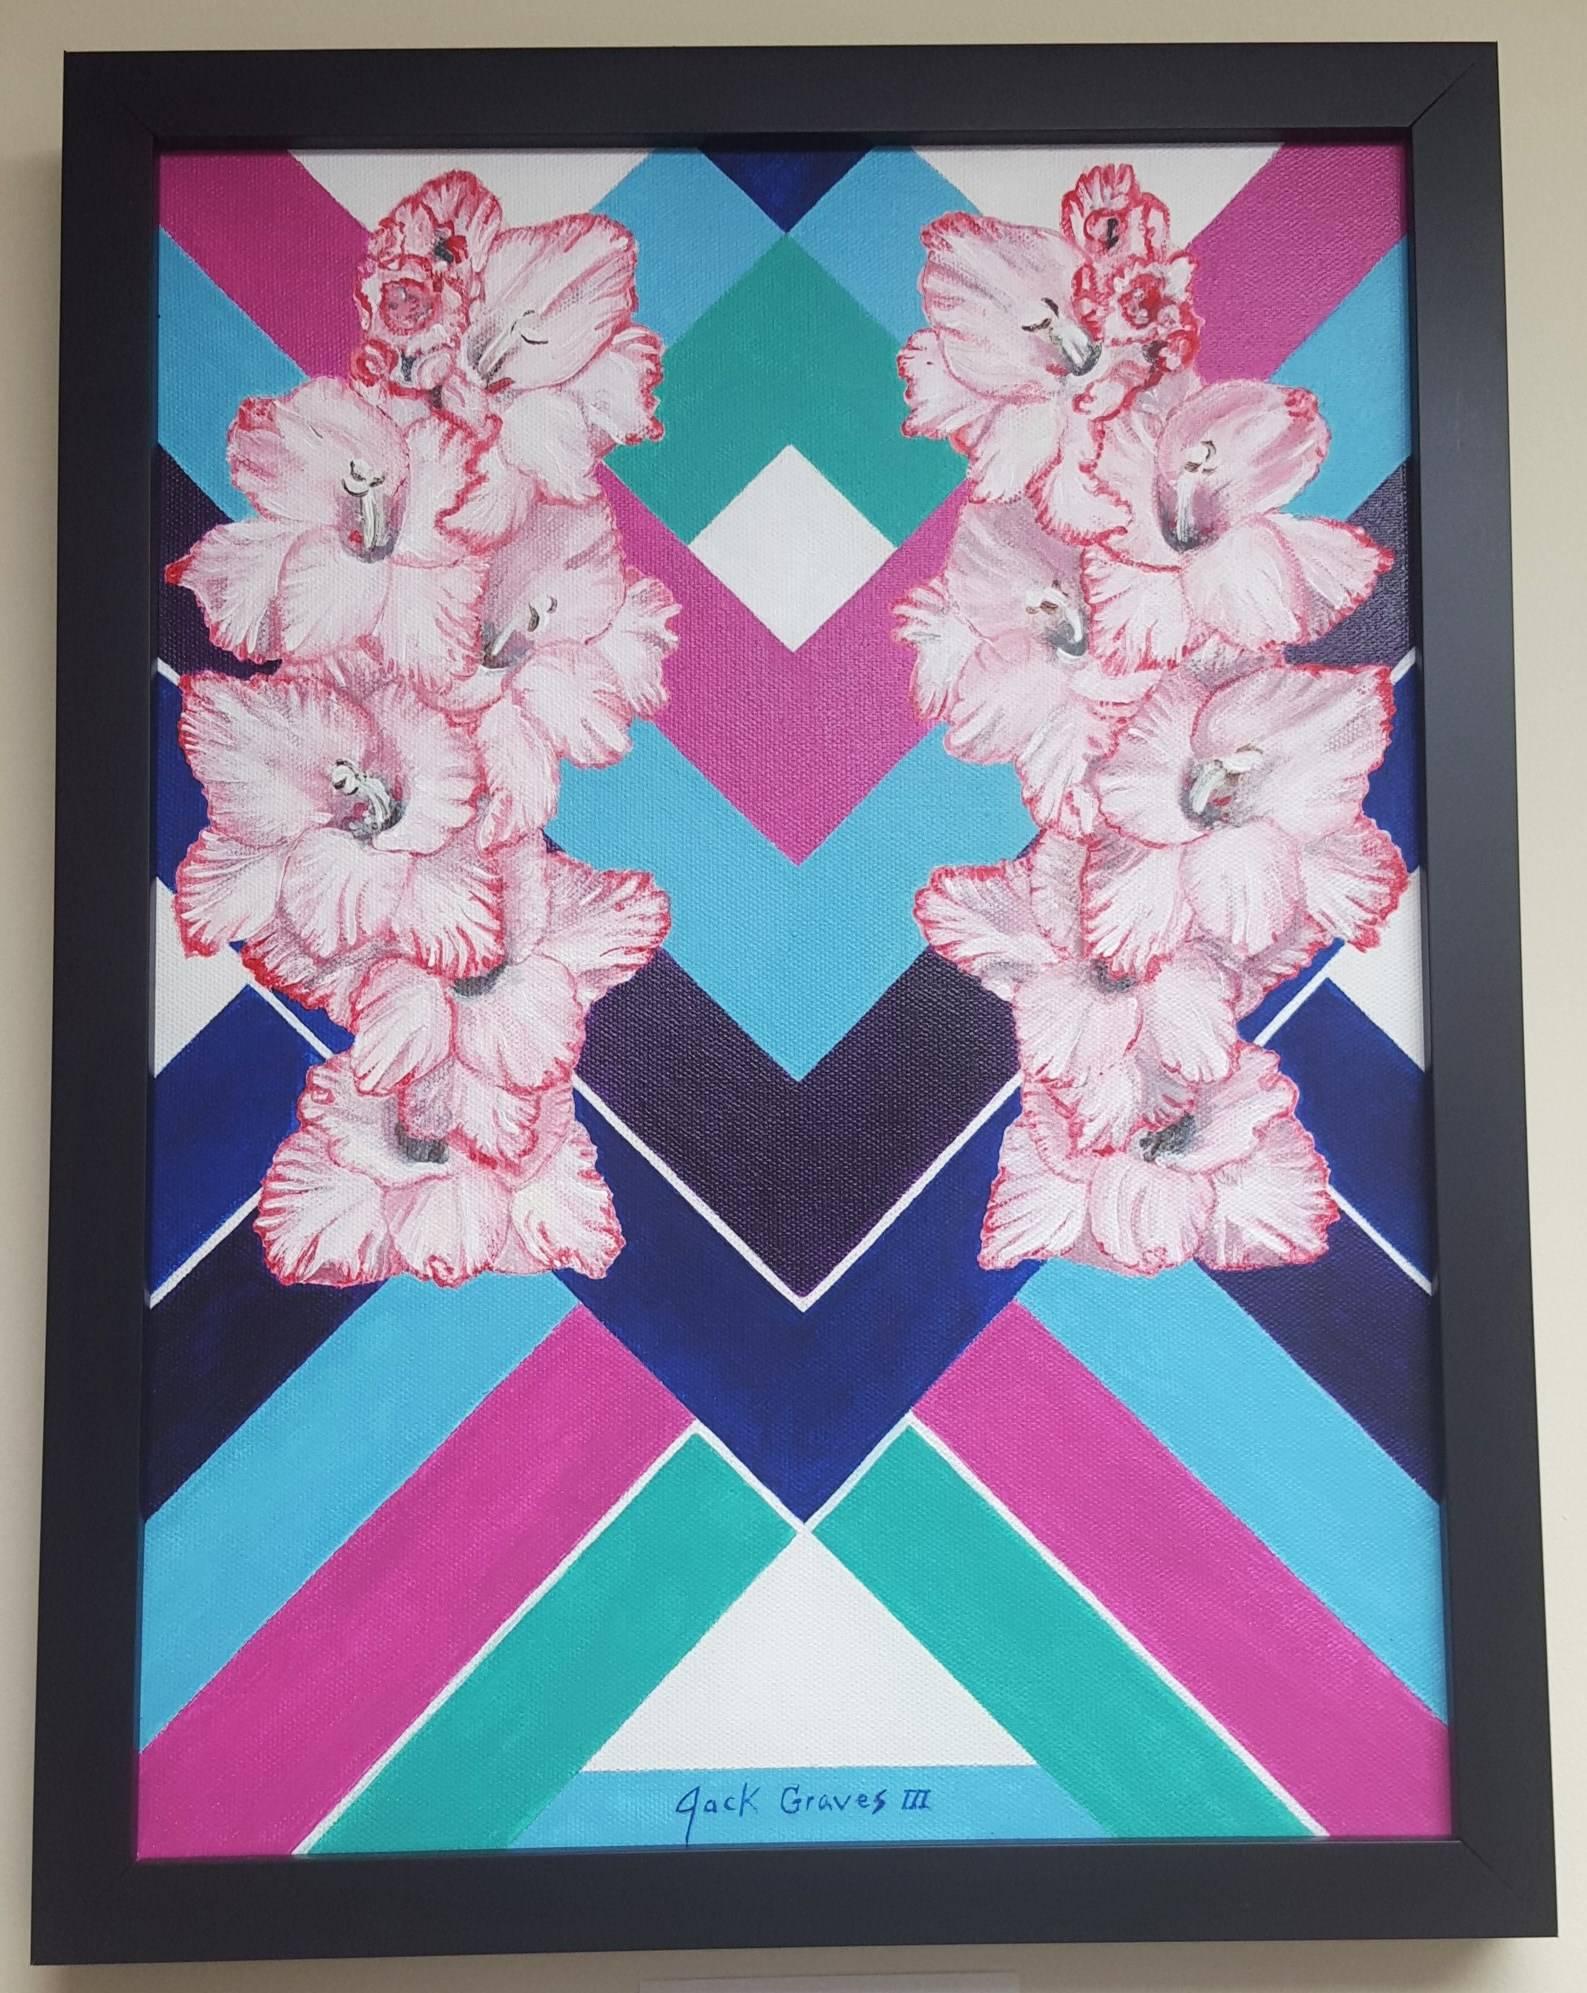 Geometric Empress - Painting by Jack Graves III